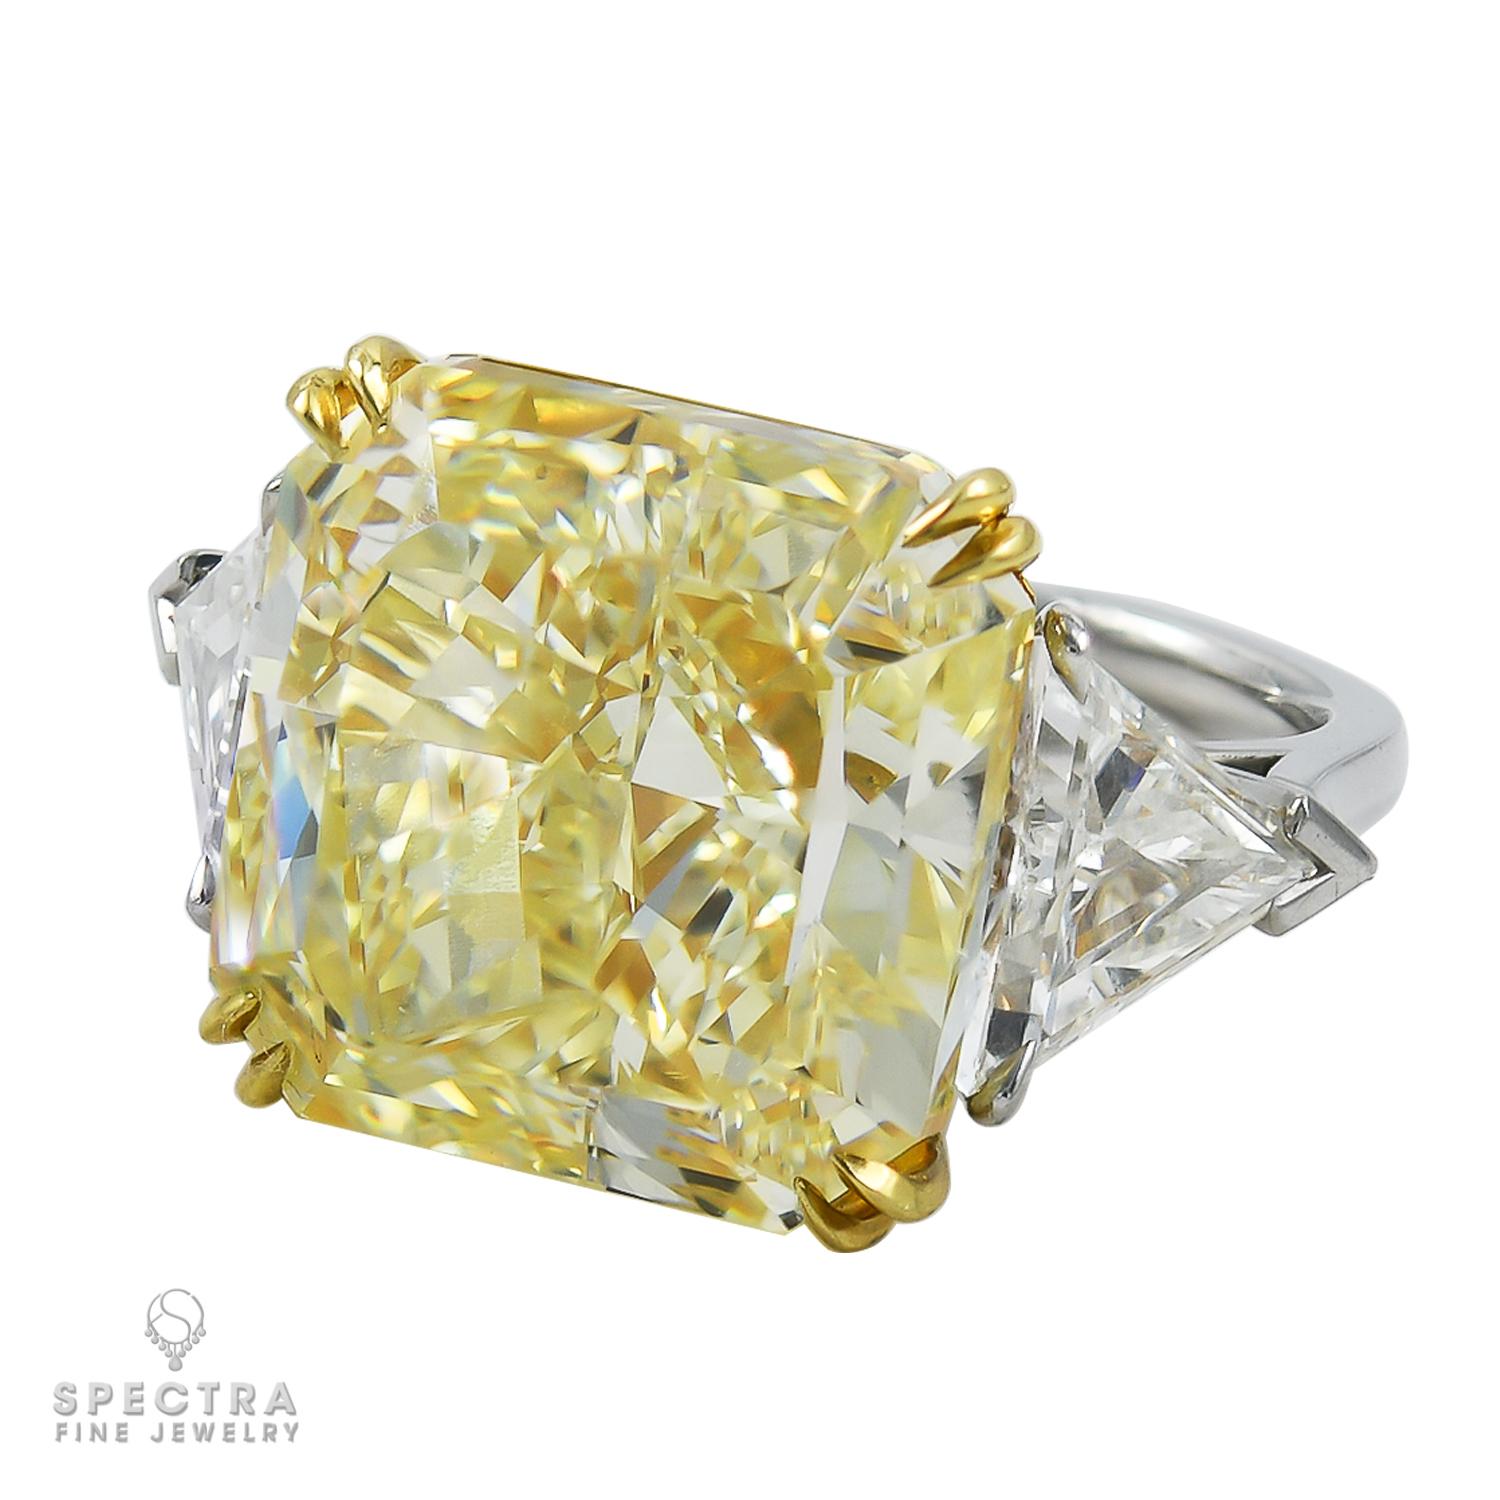 A beautiful cocktail or engagement ring featuring a canary (fancy yellow) diamond weighing 20.11 carats, accented with two white triangular diamonds on both sides weighing 2.23 carats total, by Spectra Fine Jewelry. 
The yellow diamond is